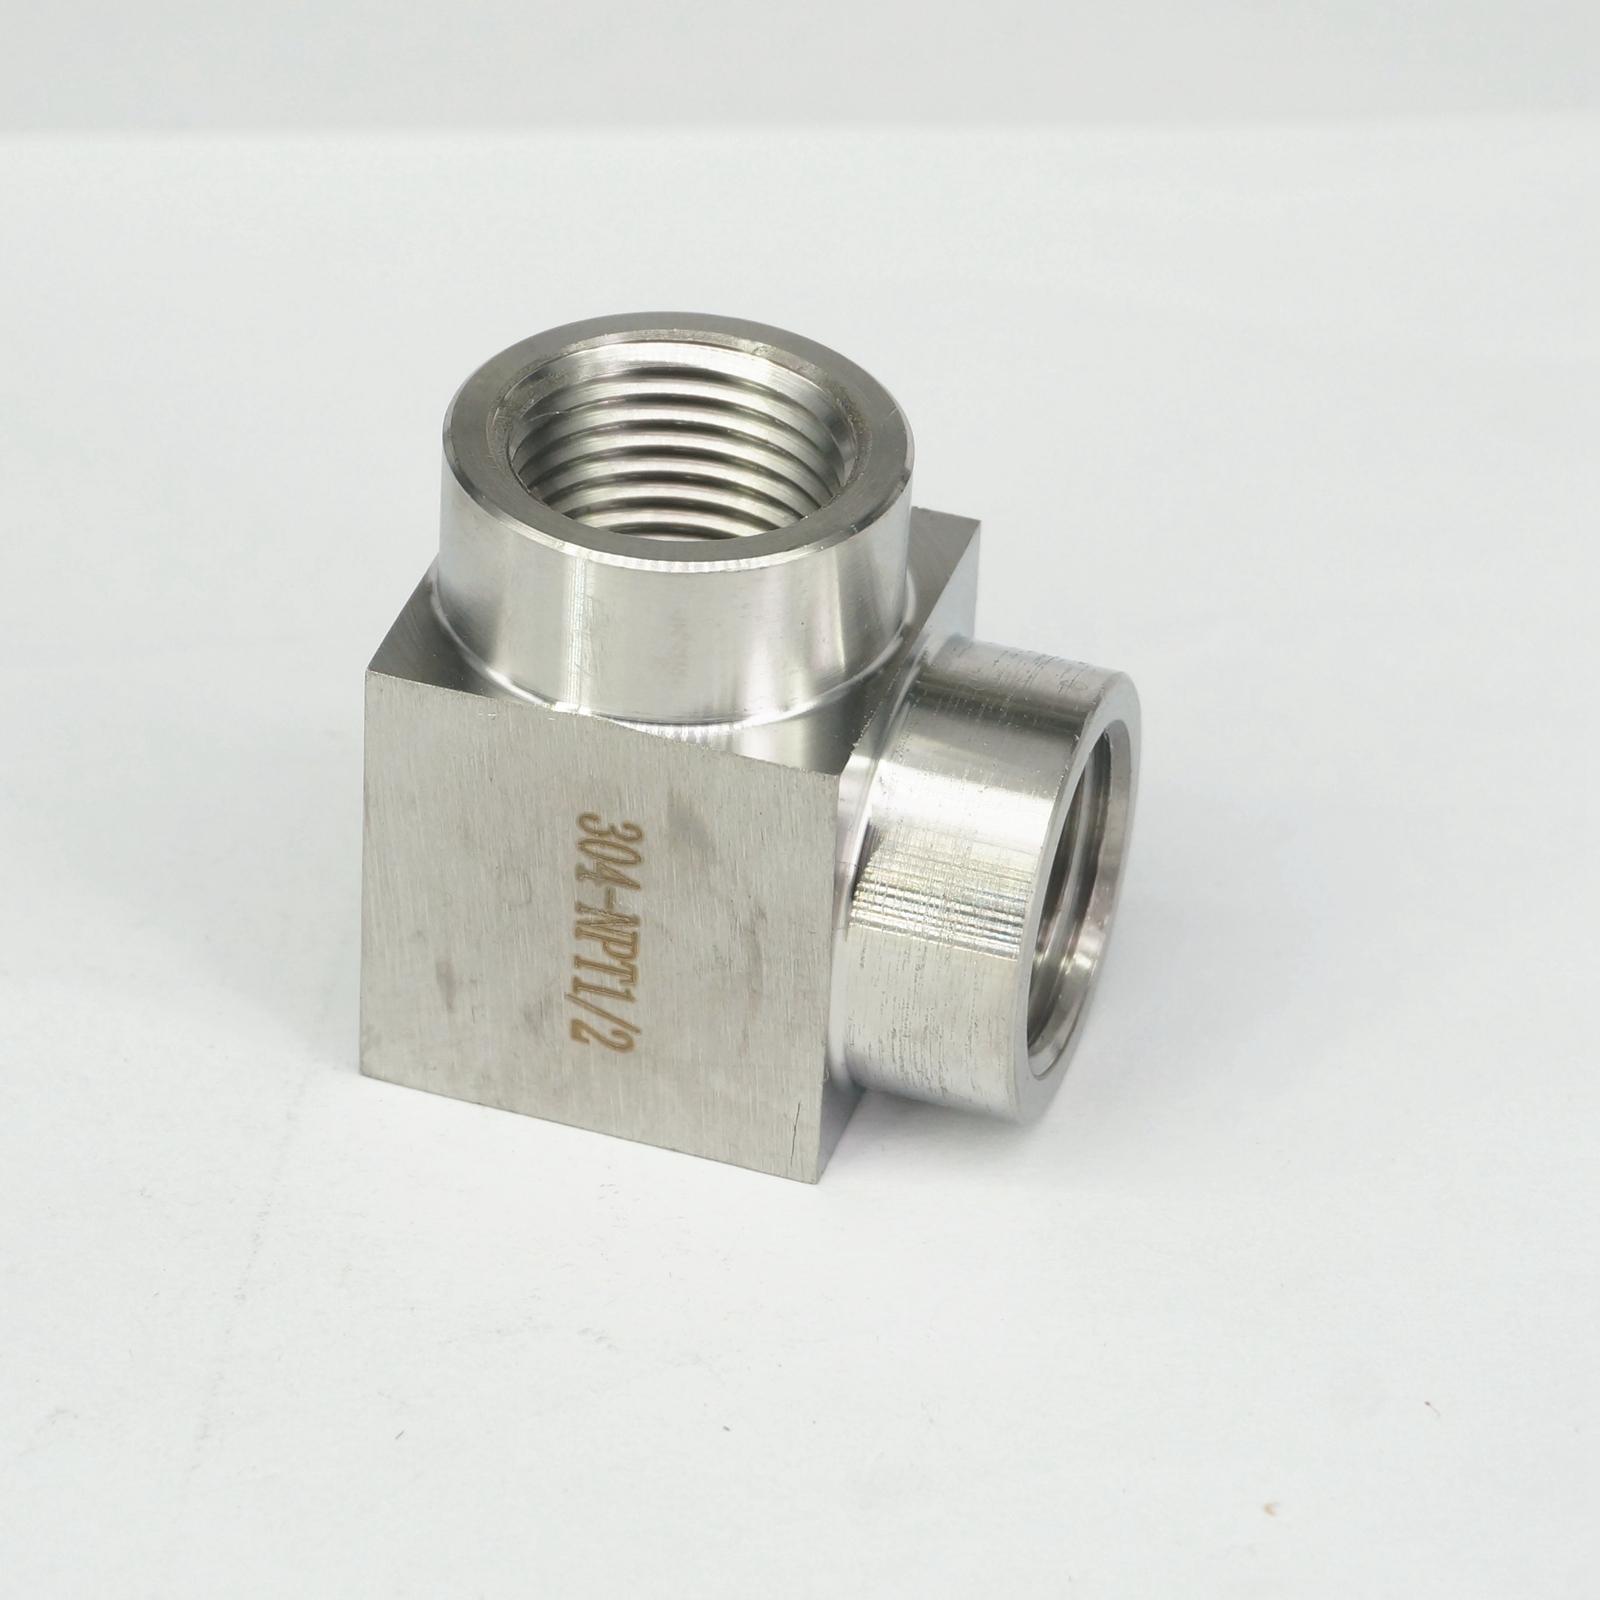 1/2 "Npt Elbow Pijp 304 Roestvrij Staal Water Gas Olie